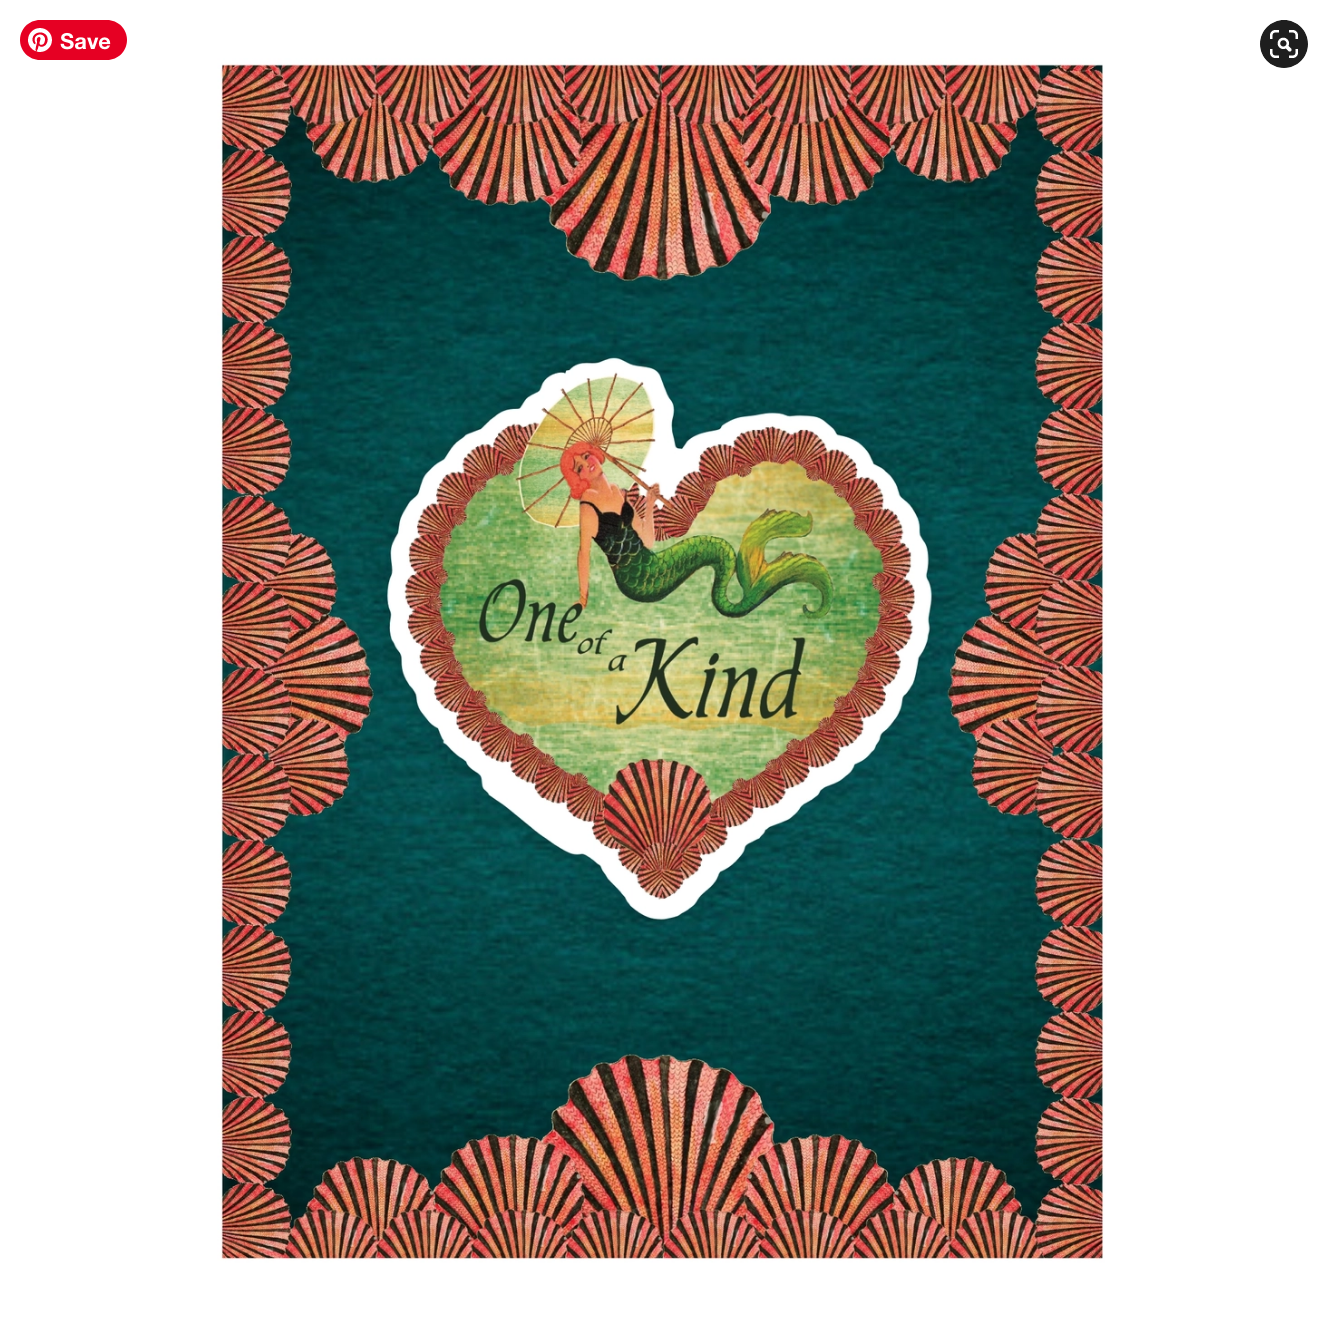 “ONE OF A KIND” Greeting Card with Detachable Vinyl Sticker - C